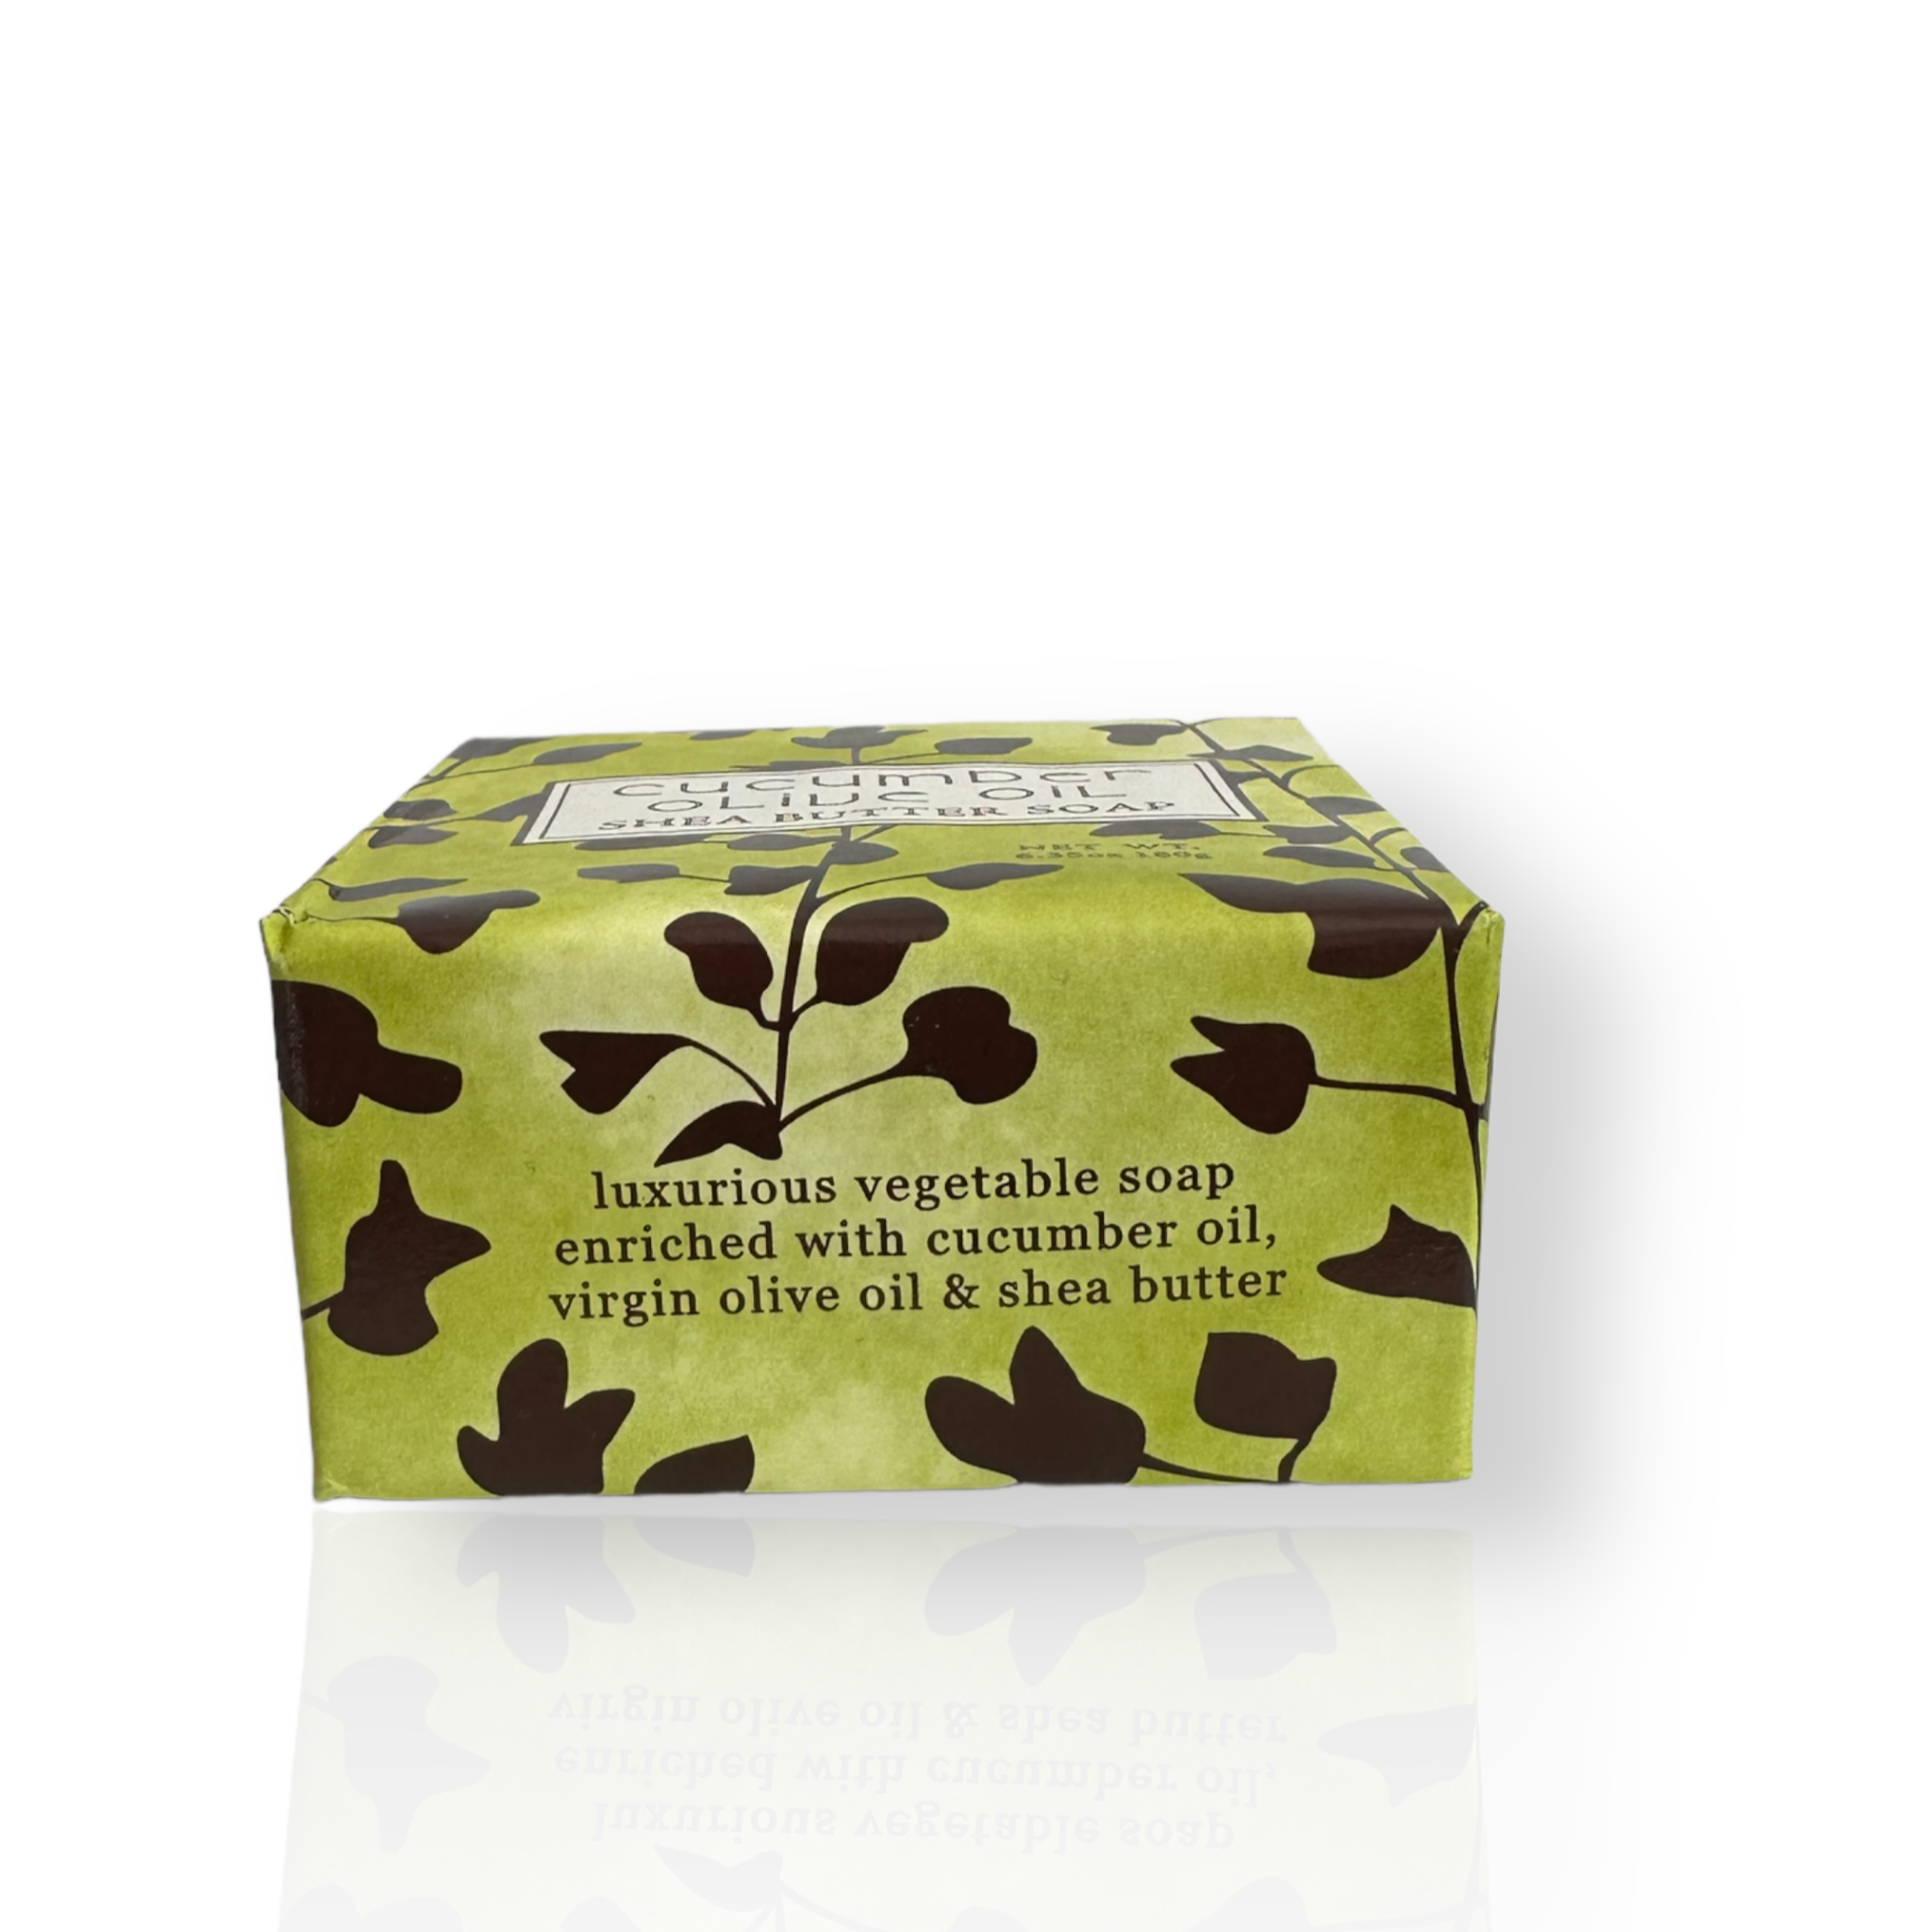 Greenwich Bay Trading Company Cucumber Olive Soaps